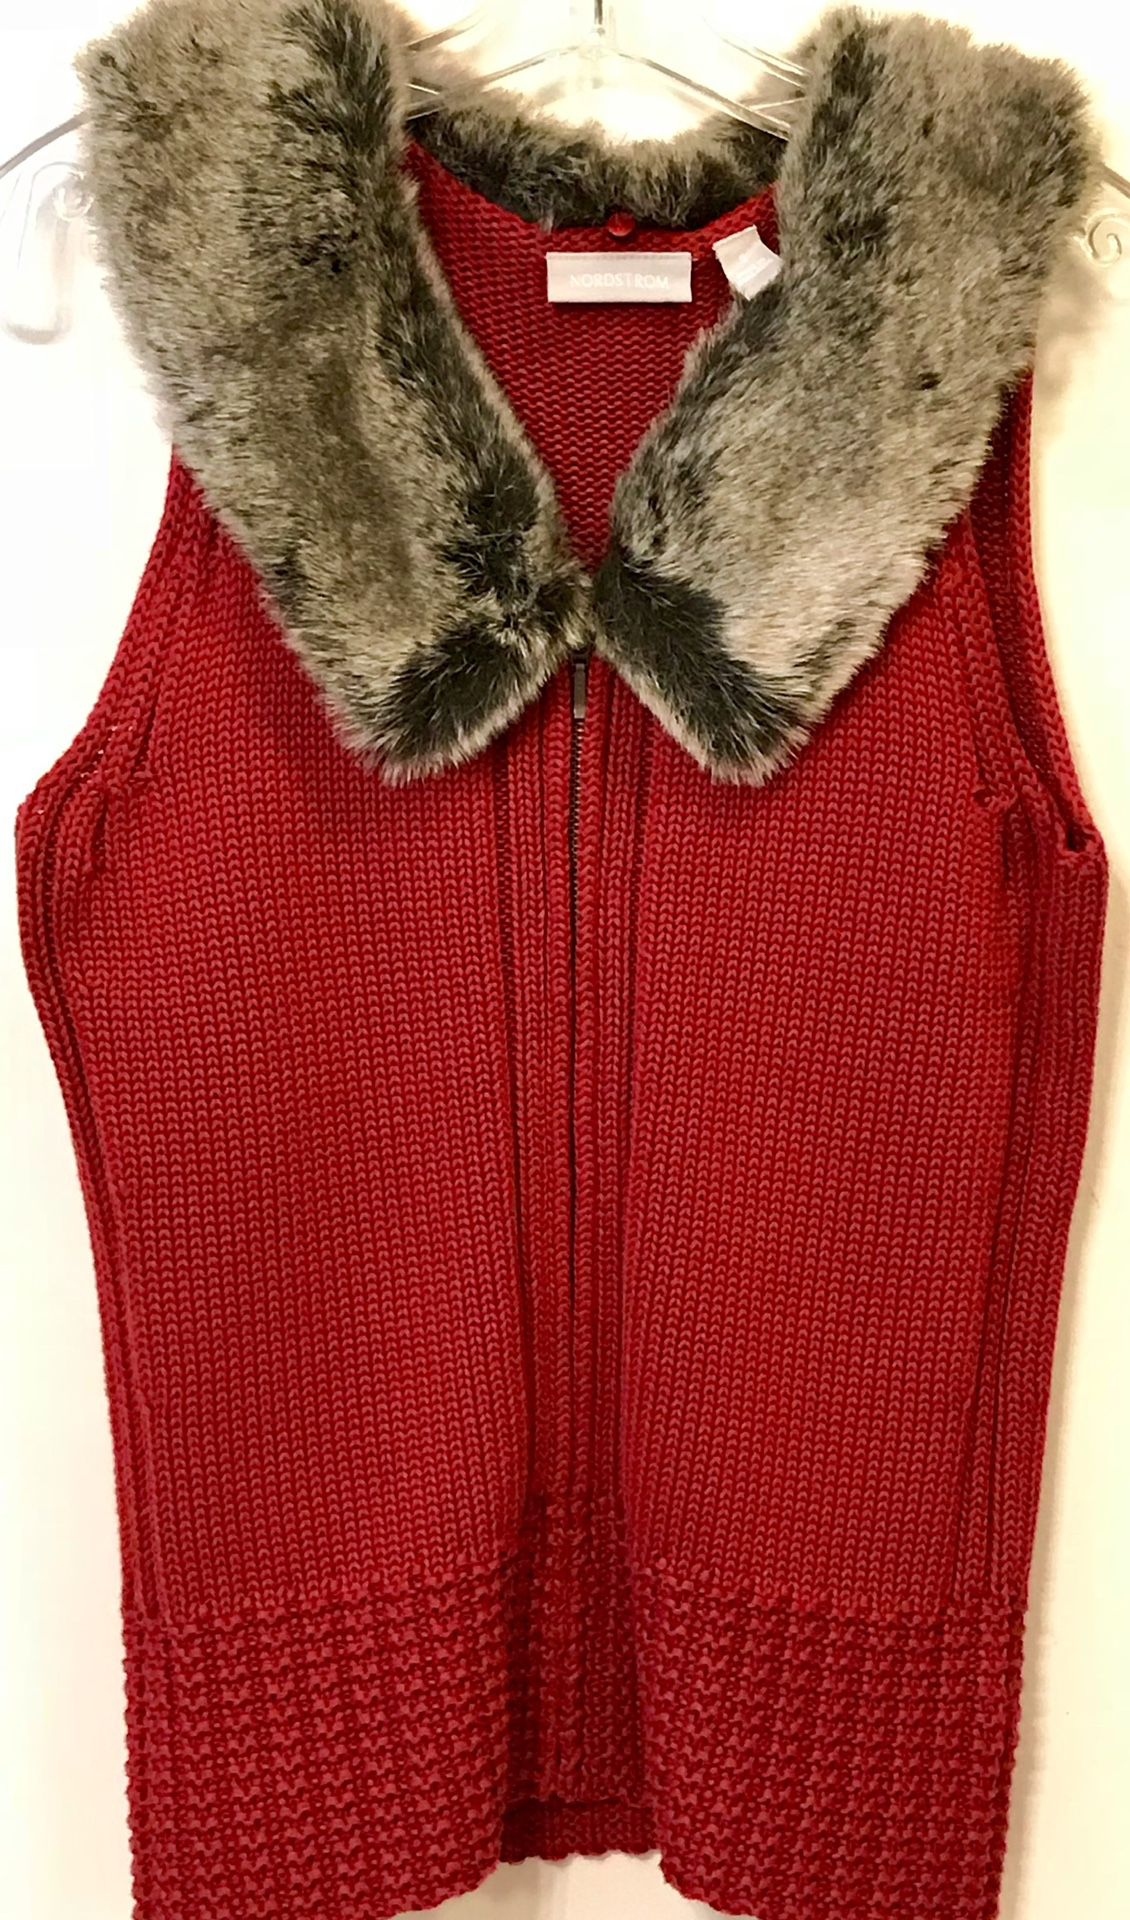 New Nordstrom’s Sweater Vest (Removable Collar) Size Small 